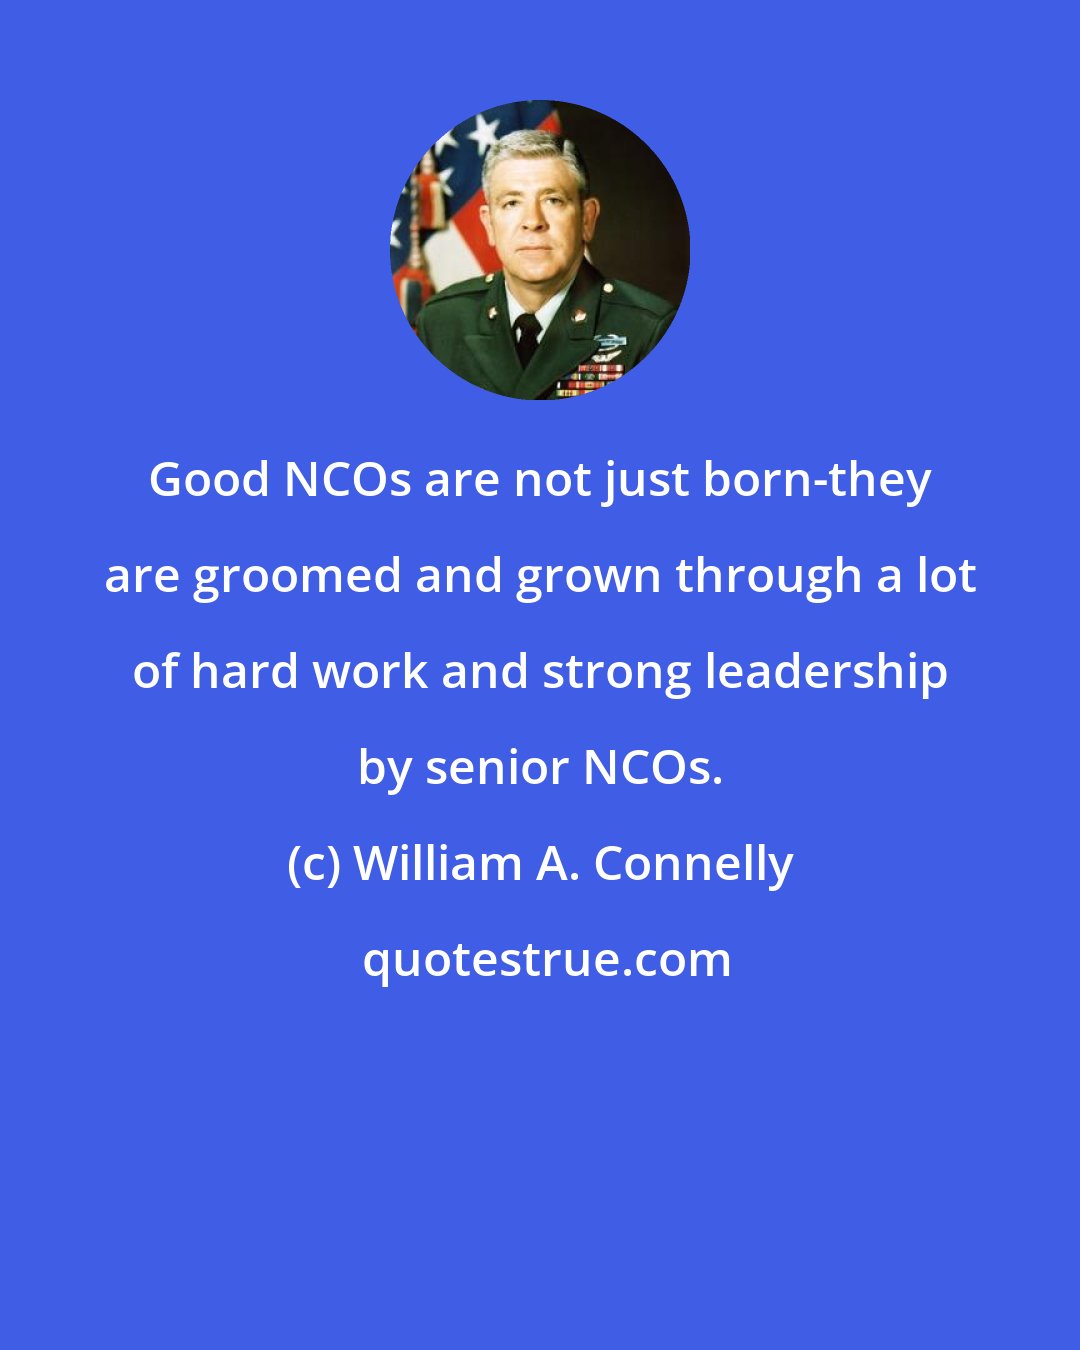 William A. Connelly: Good NCOs are not just born-they are groomed and grown through a lot of hard work and strong leadership by senior NCOs.